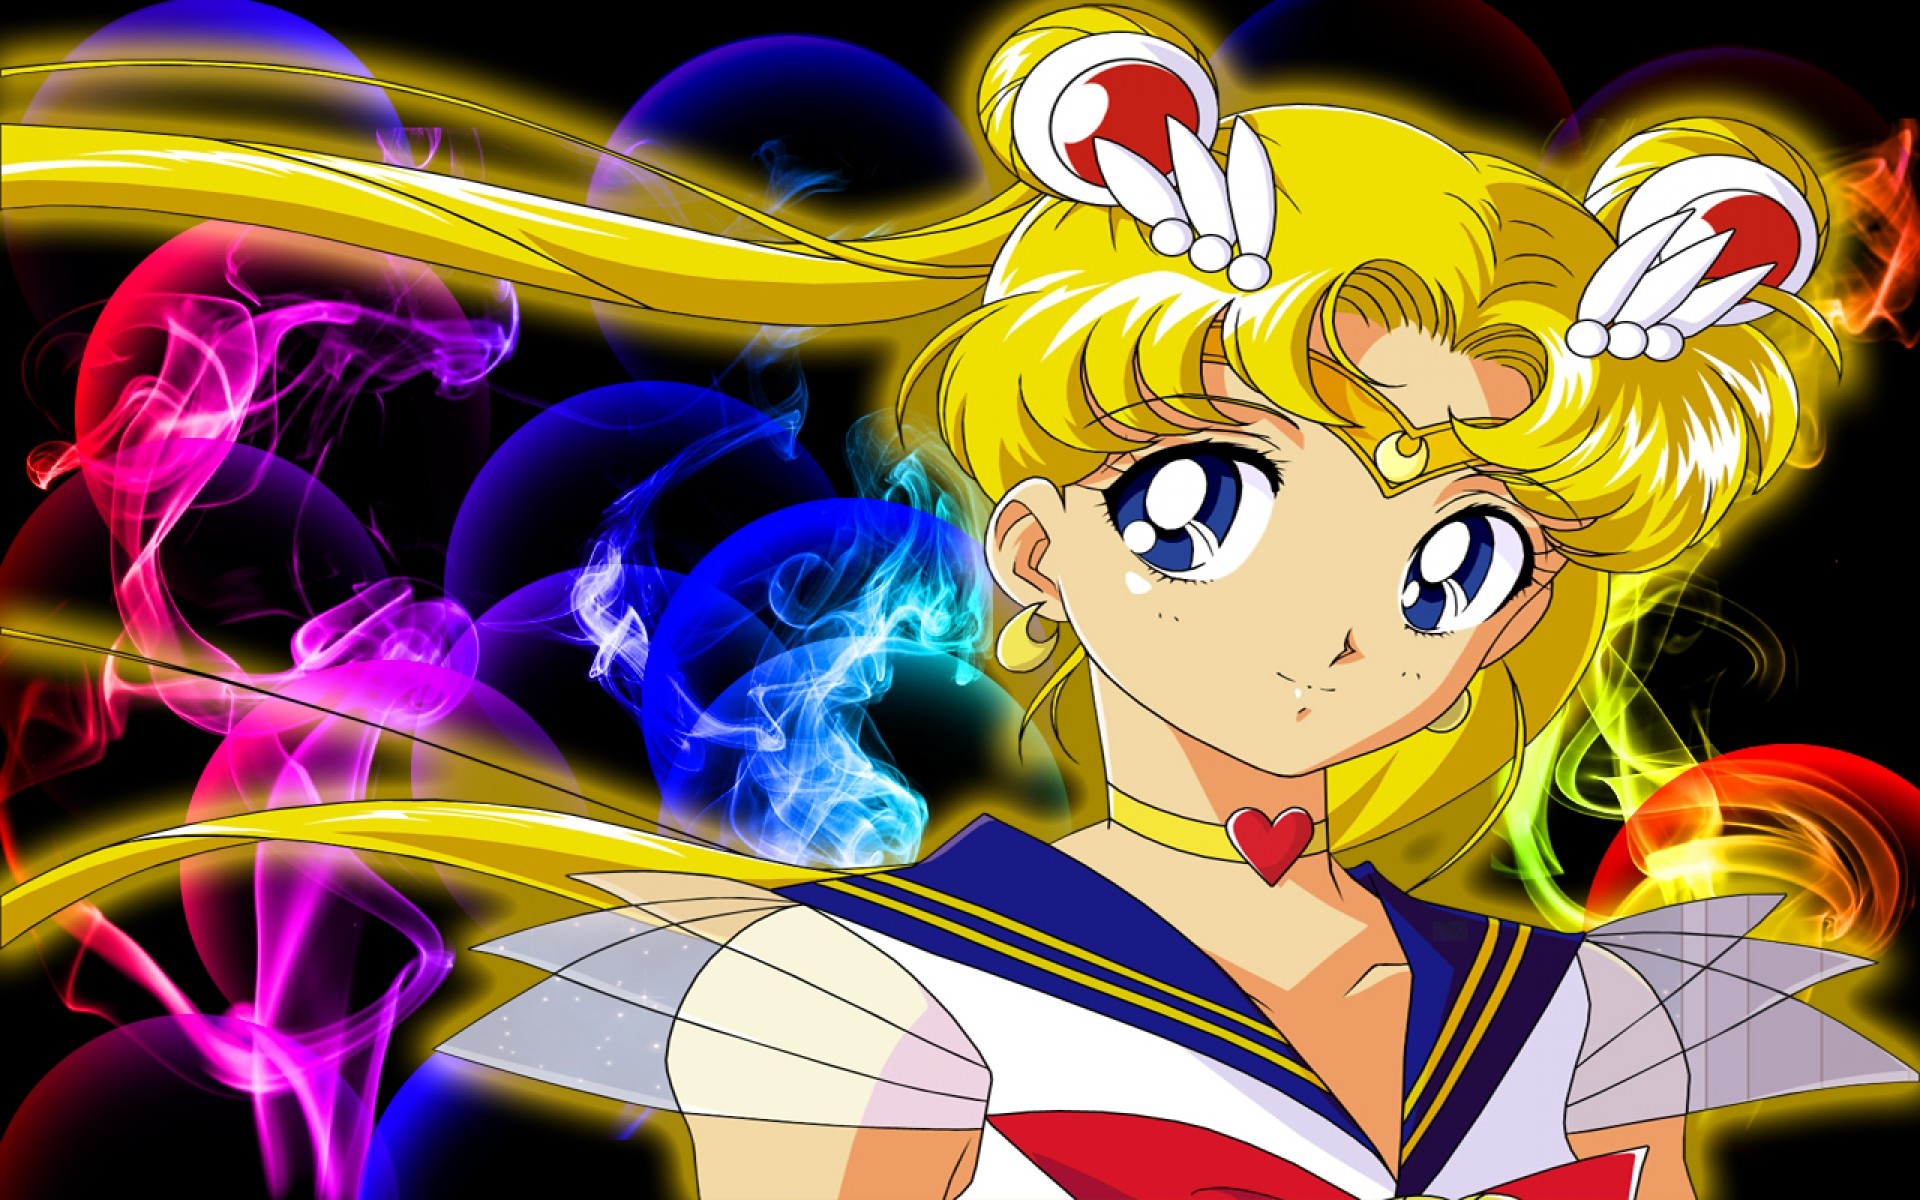 1920x1200  Sailor Moon 6. How to set wallpaper on your desktop? Click the  download link from above and set the wallpaper on the desktop from your OS.